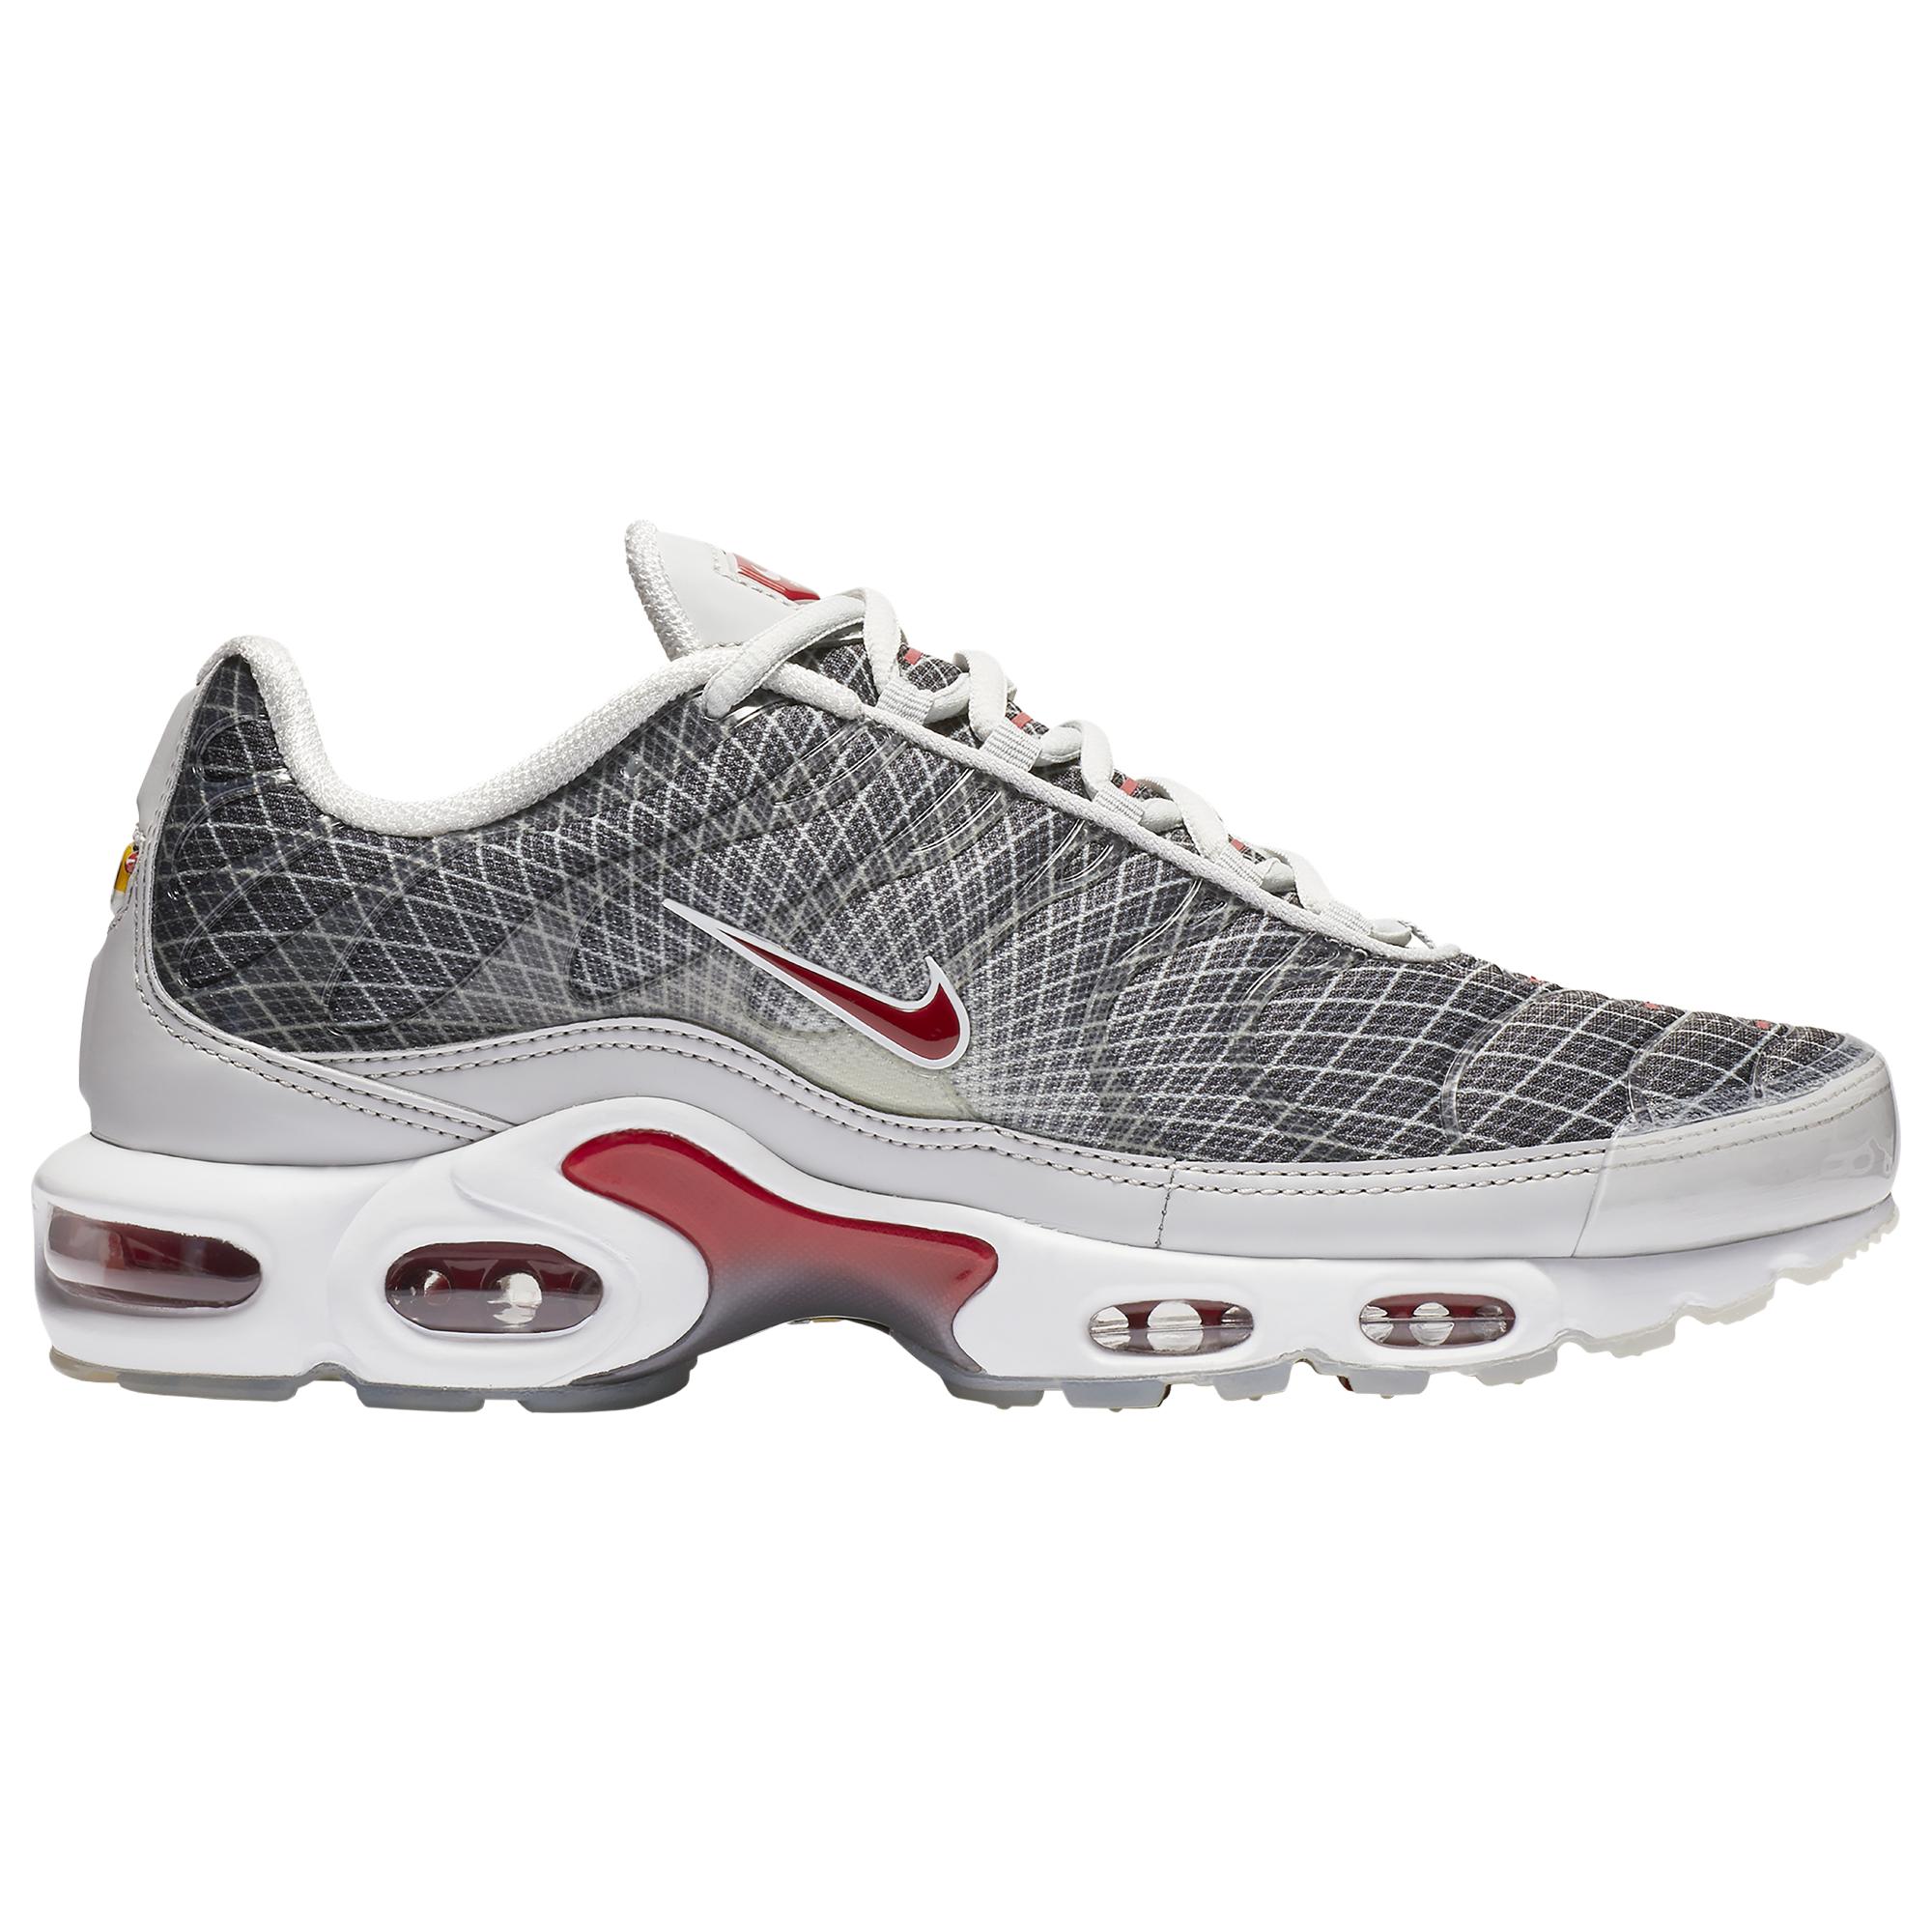 Nike Synthetic Air Max Plus Grid - Shoes in Grey/Red (Gray) for Men - Lyst